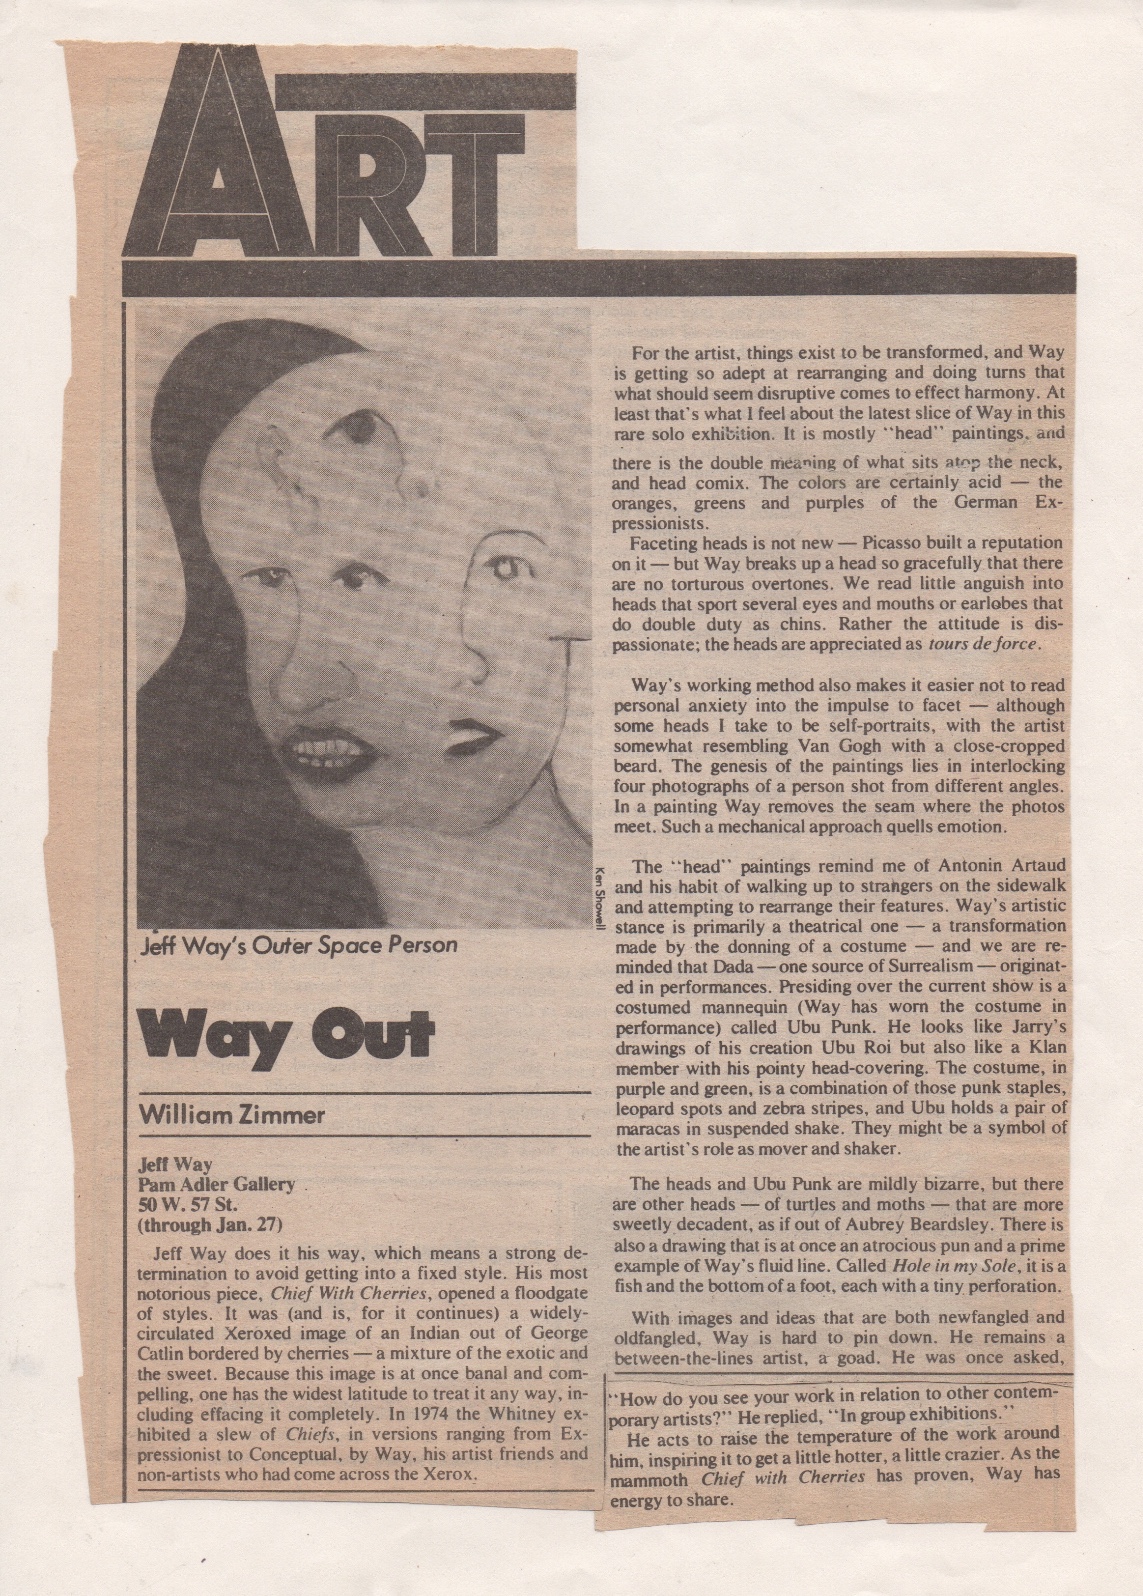 Way Out, William Zimmer, Soho Weekly News 1976